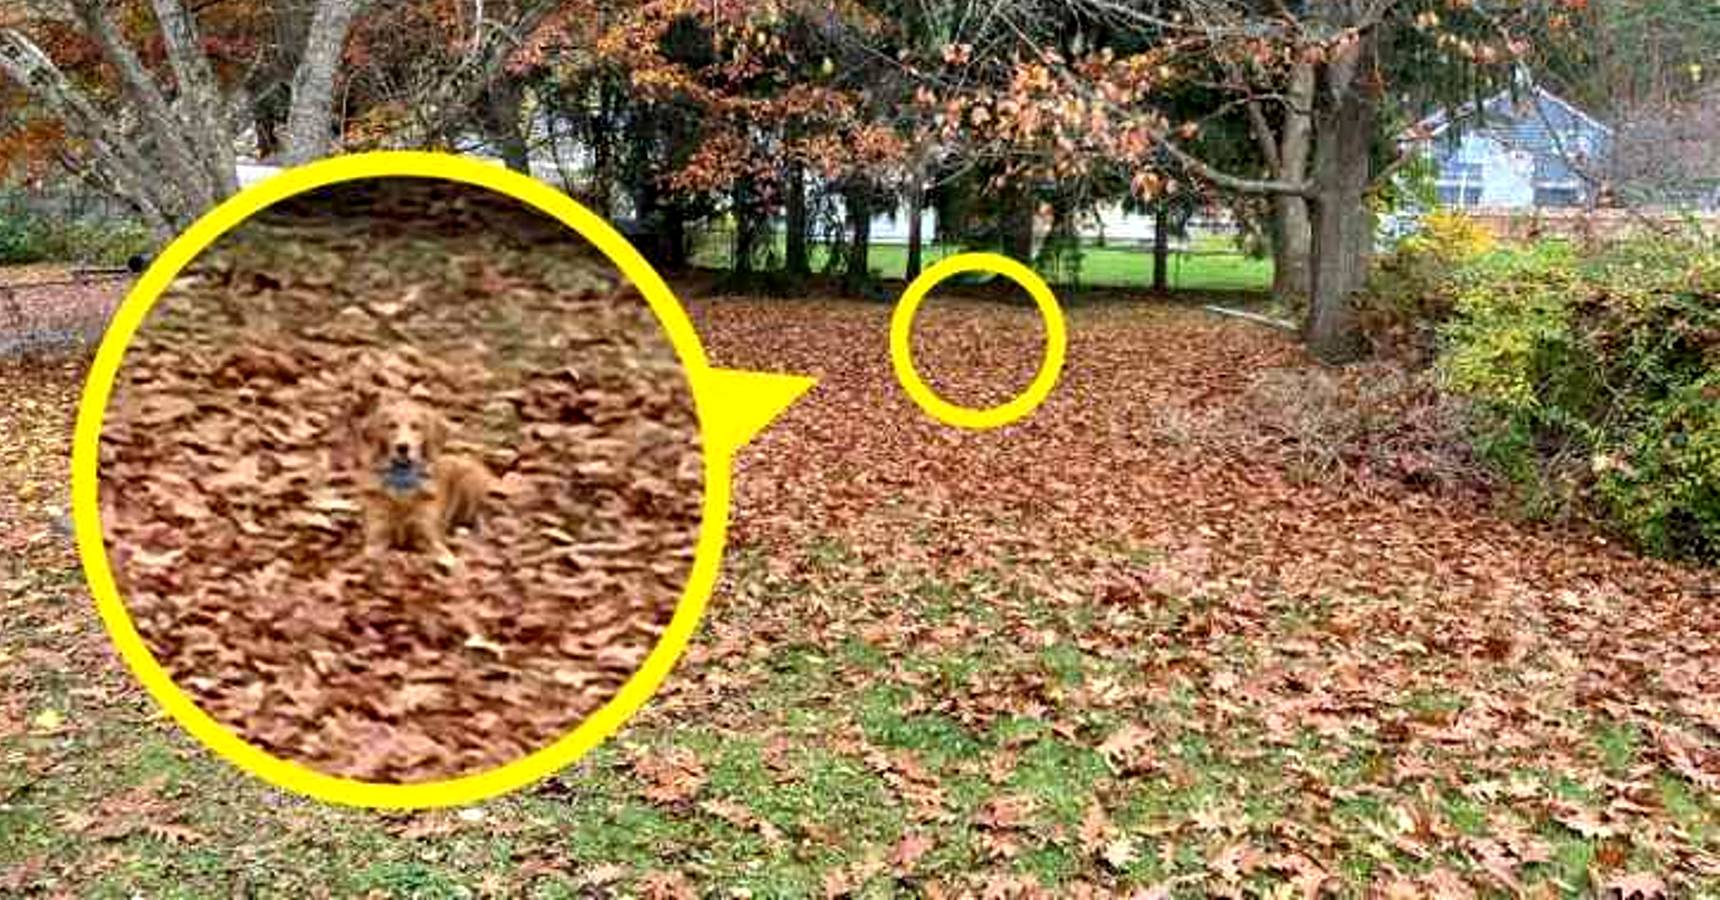 Optical illusion, Optical illusion dog in between tree and leaves